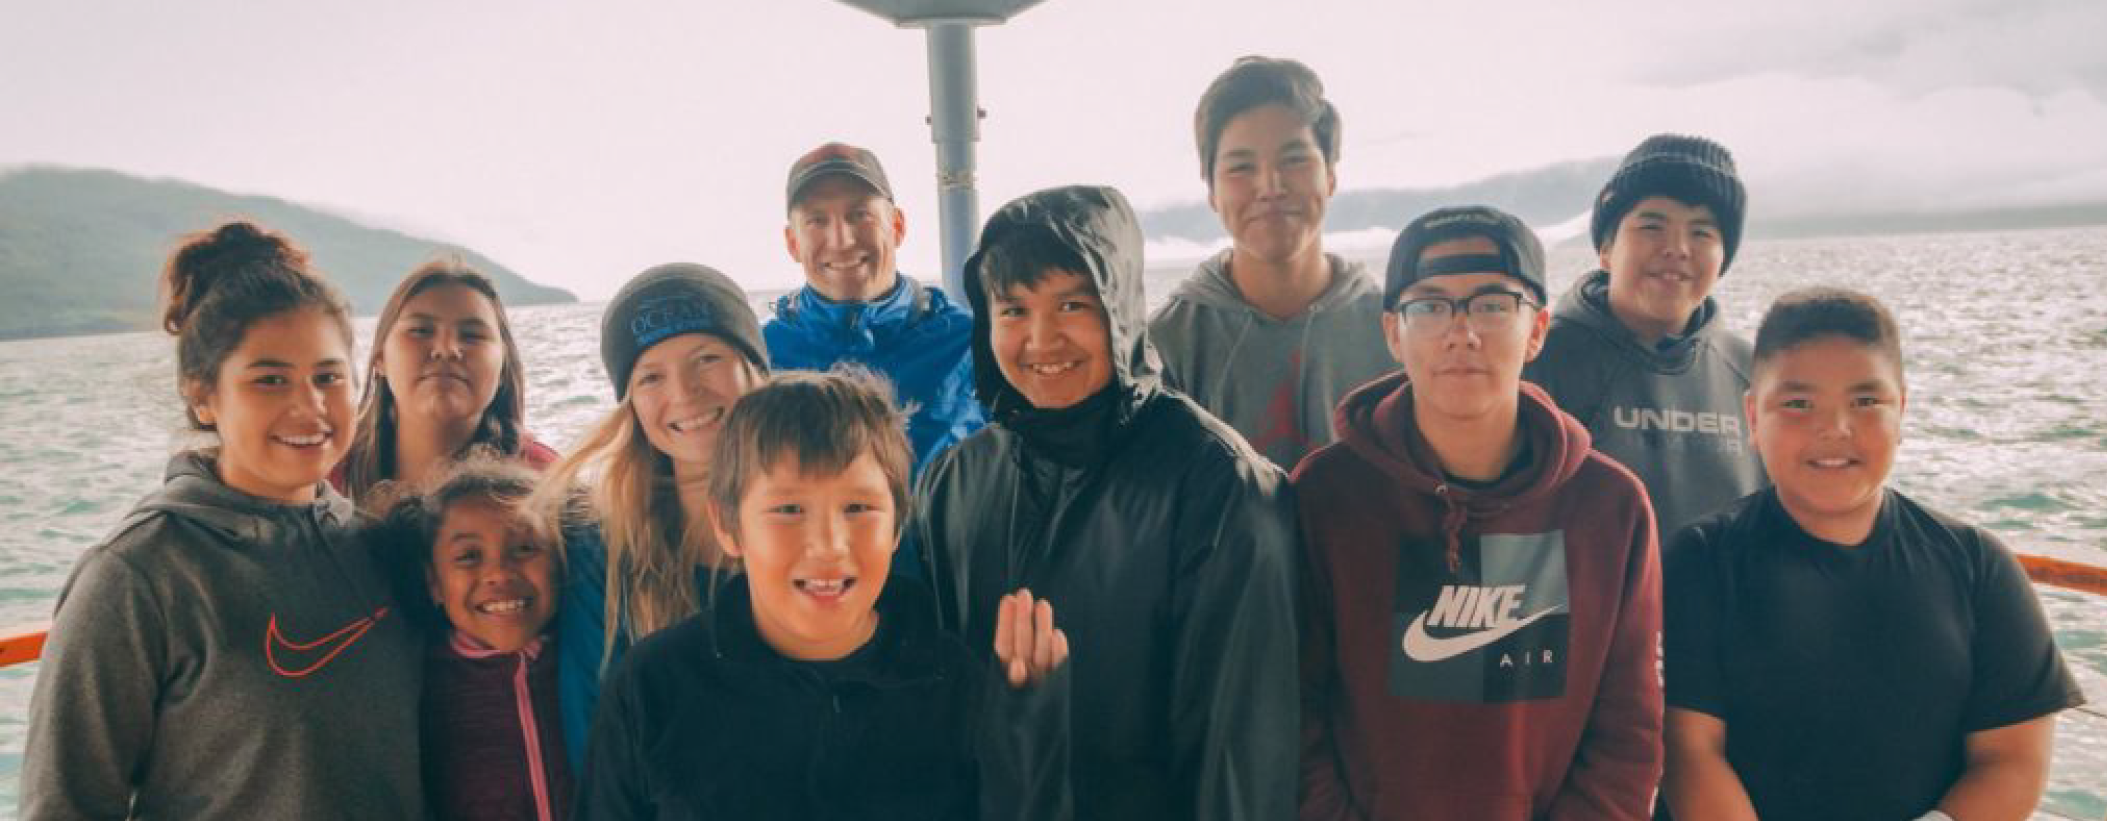 Andrea Reid and John-Francis Lane with their salmon science camp participants from the Nisga’a village of Gingolx in the Portland Inlet on B.C. north coast in 2018.